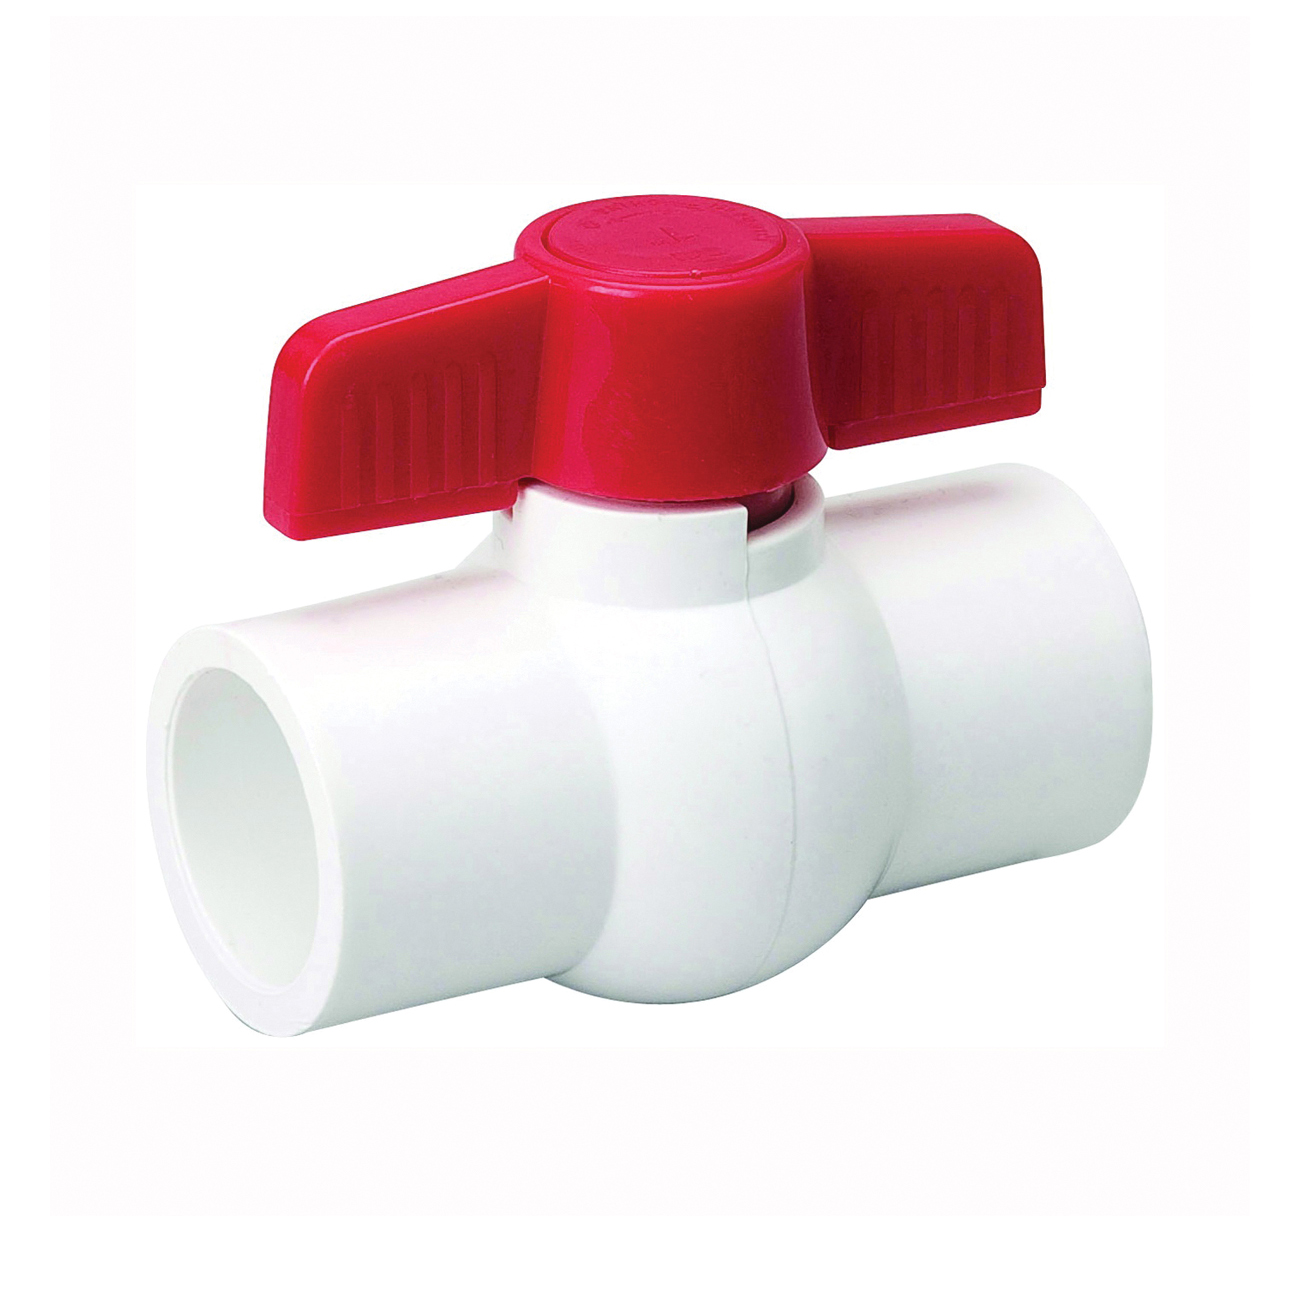 107-638HC Ball Valve, 2 in Connection, Compression, 150 psi Pressure, Manual Actuator, PVC Body